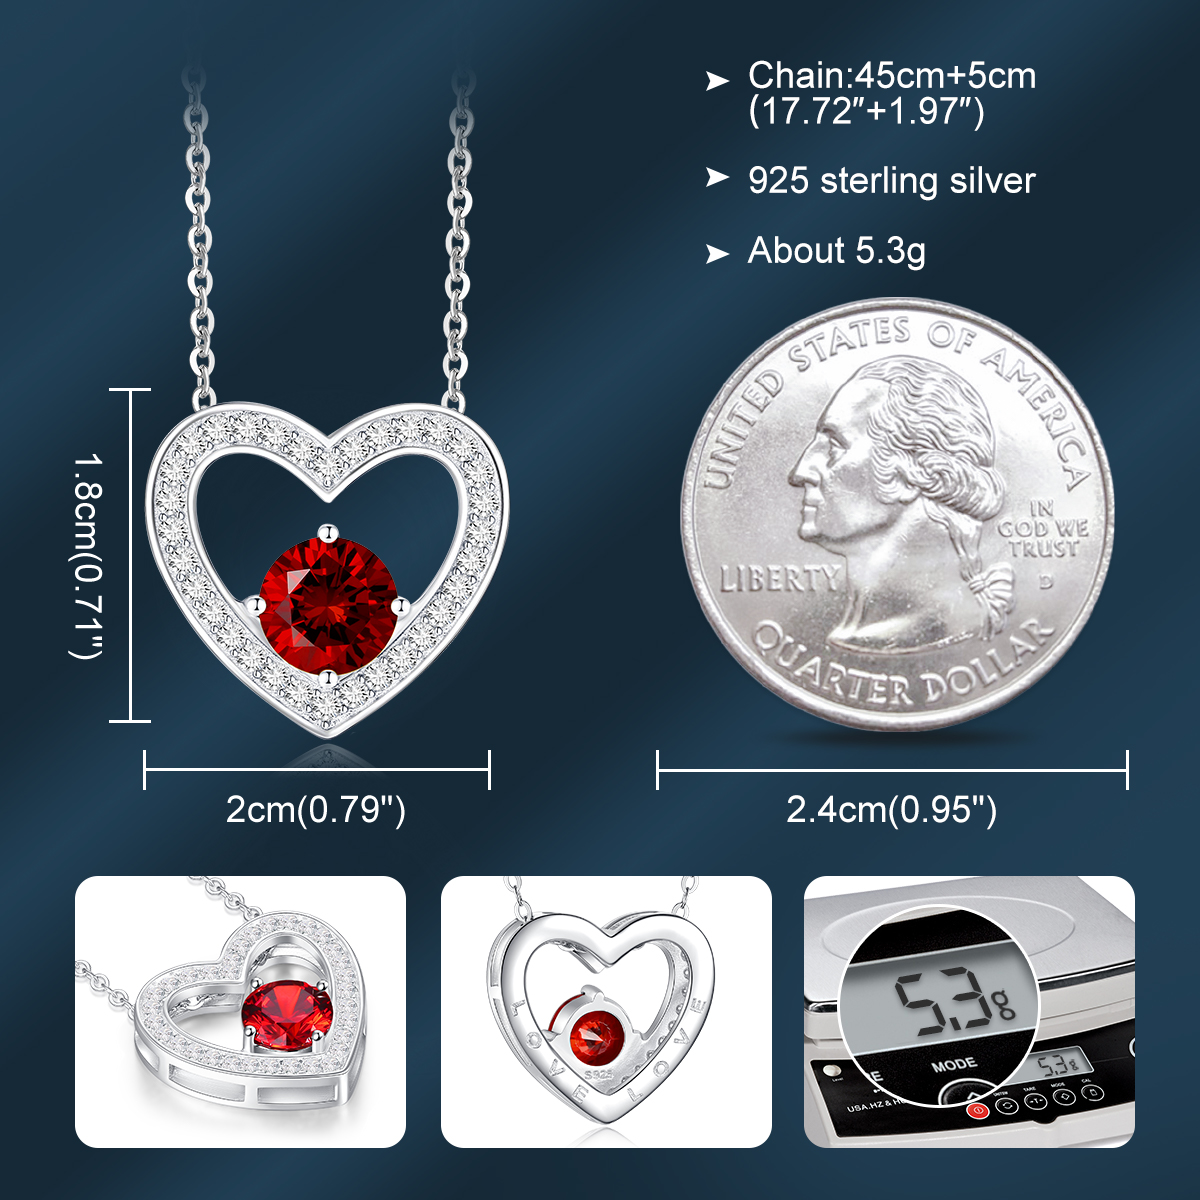 CDE Brave Heart 925 Silver Necklaces with Birthstone for Women Girls Mom Wife Girlfriend, Pendant Necklace Jewelry Gifts for Christmas Birthday Anniversary Valentine's Day - image 3 of 7